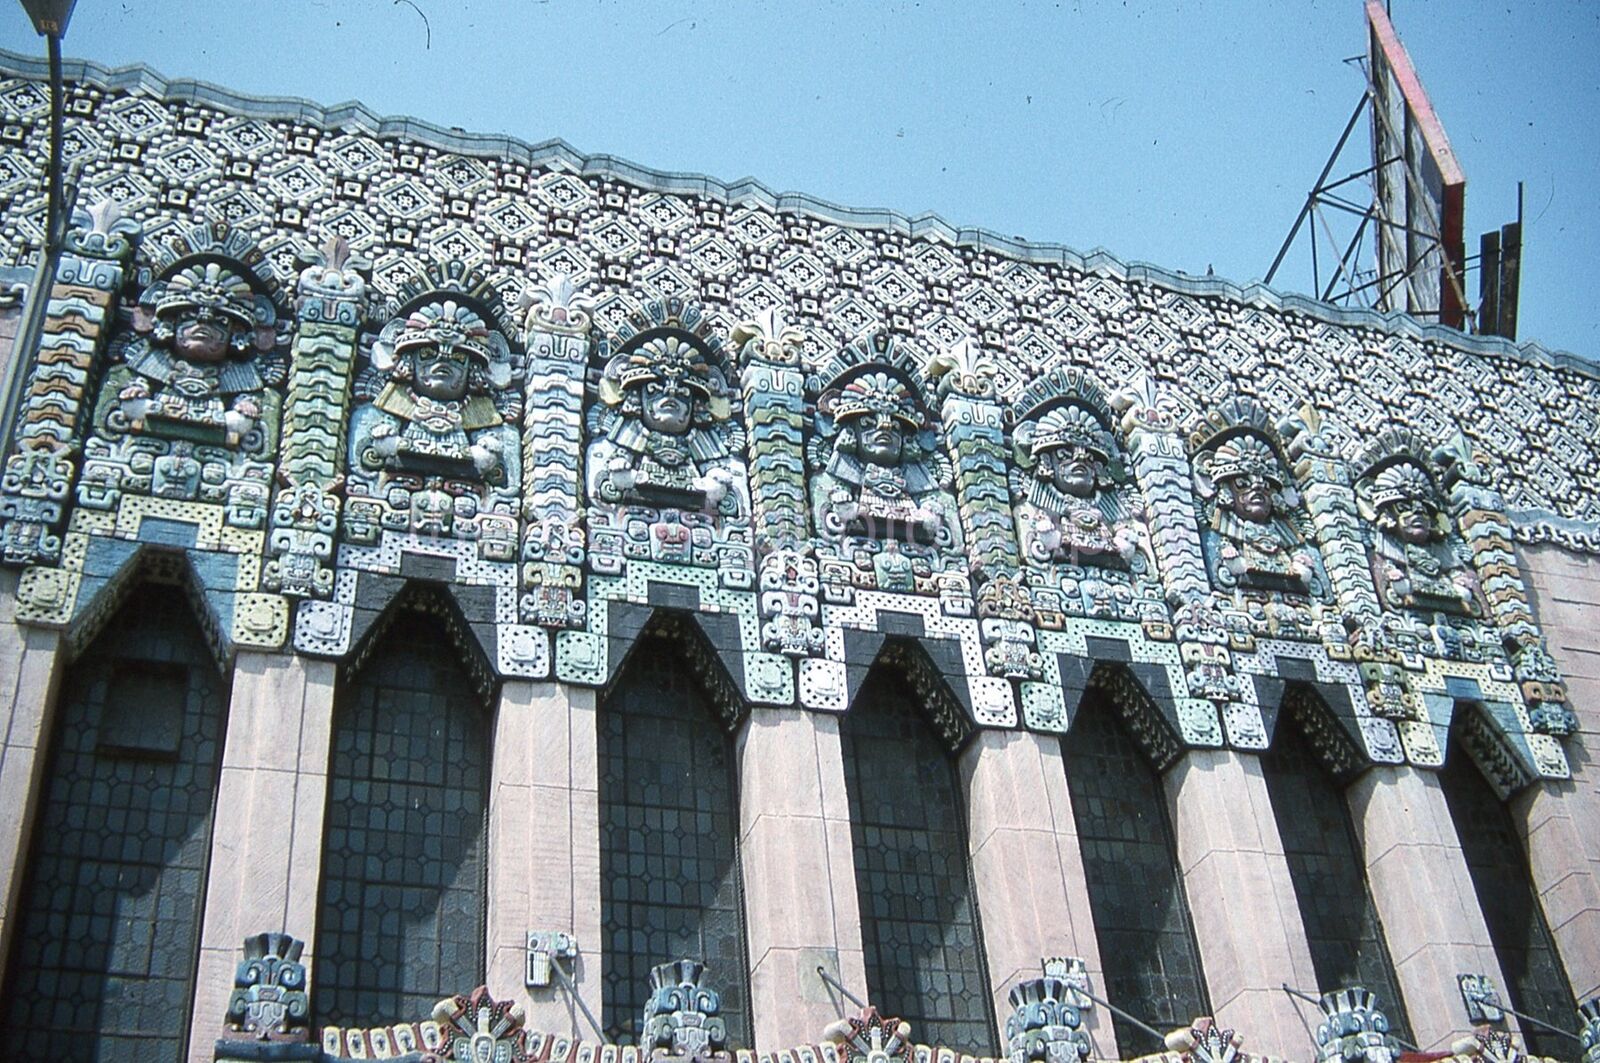 MAYAN THEATRE LOS ANGELES Found SLIDE Photo 35mmTransparency 44 T 24 J